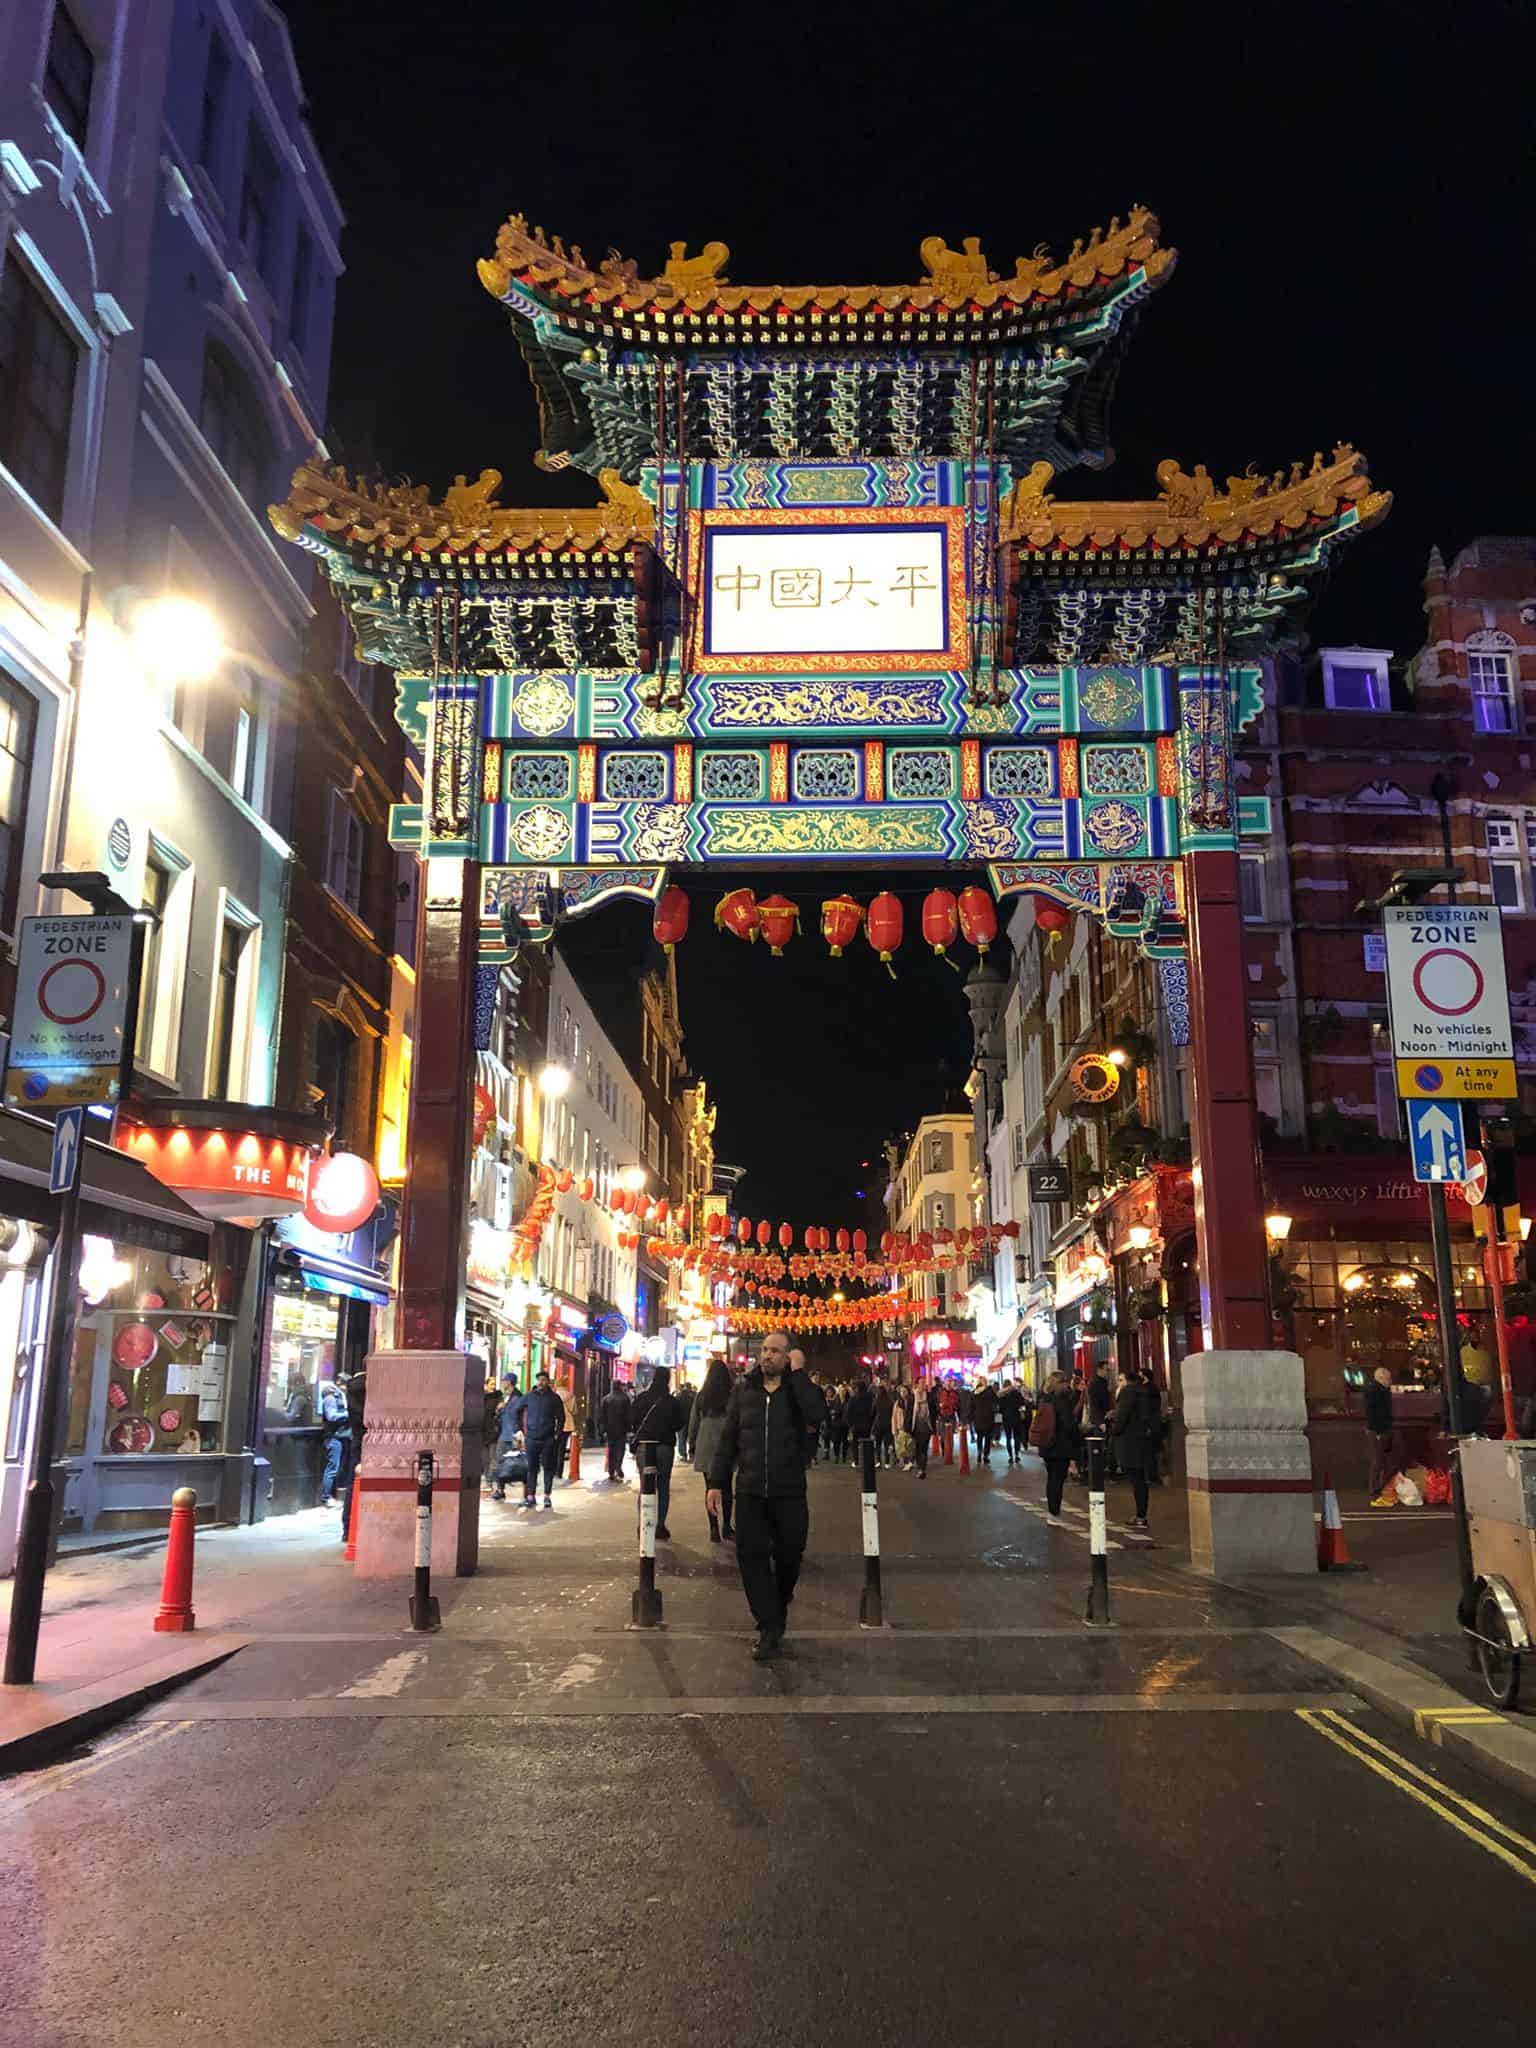 Chinatown Gate in London is one of the best streets in London! | London streets to visit